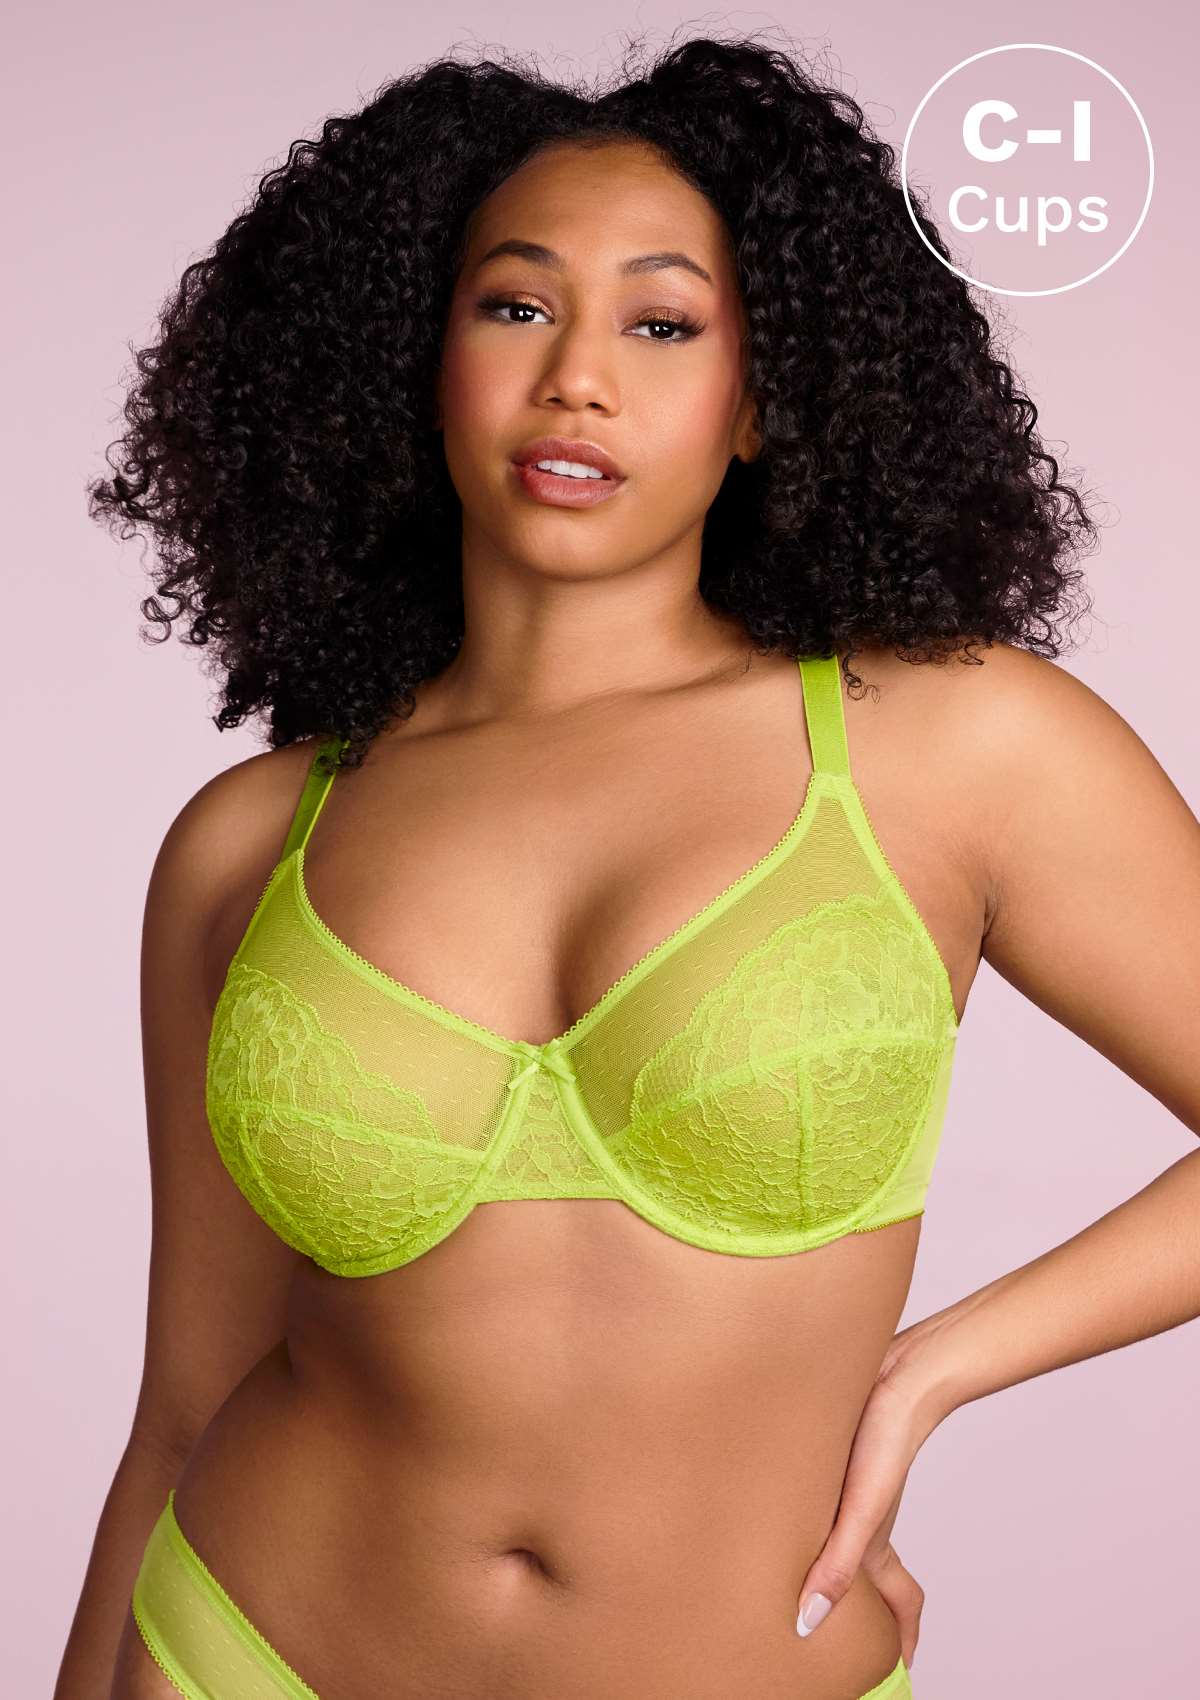 HSIA Enchante Full Cup Minimizing Bra: Supportive Unlined Lace Bra - Lime Green / 36 / D